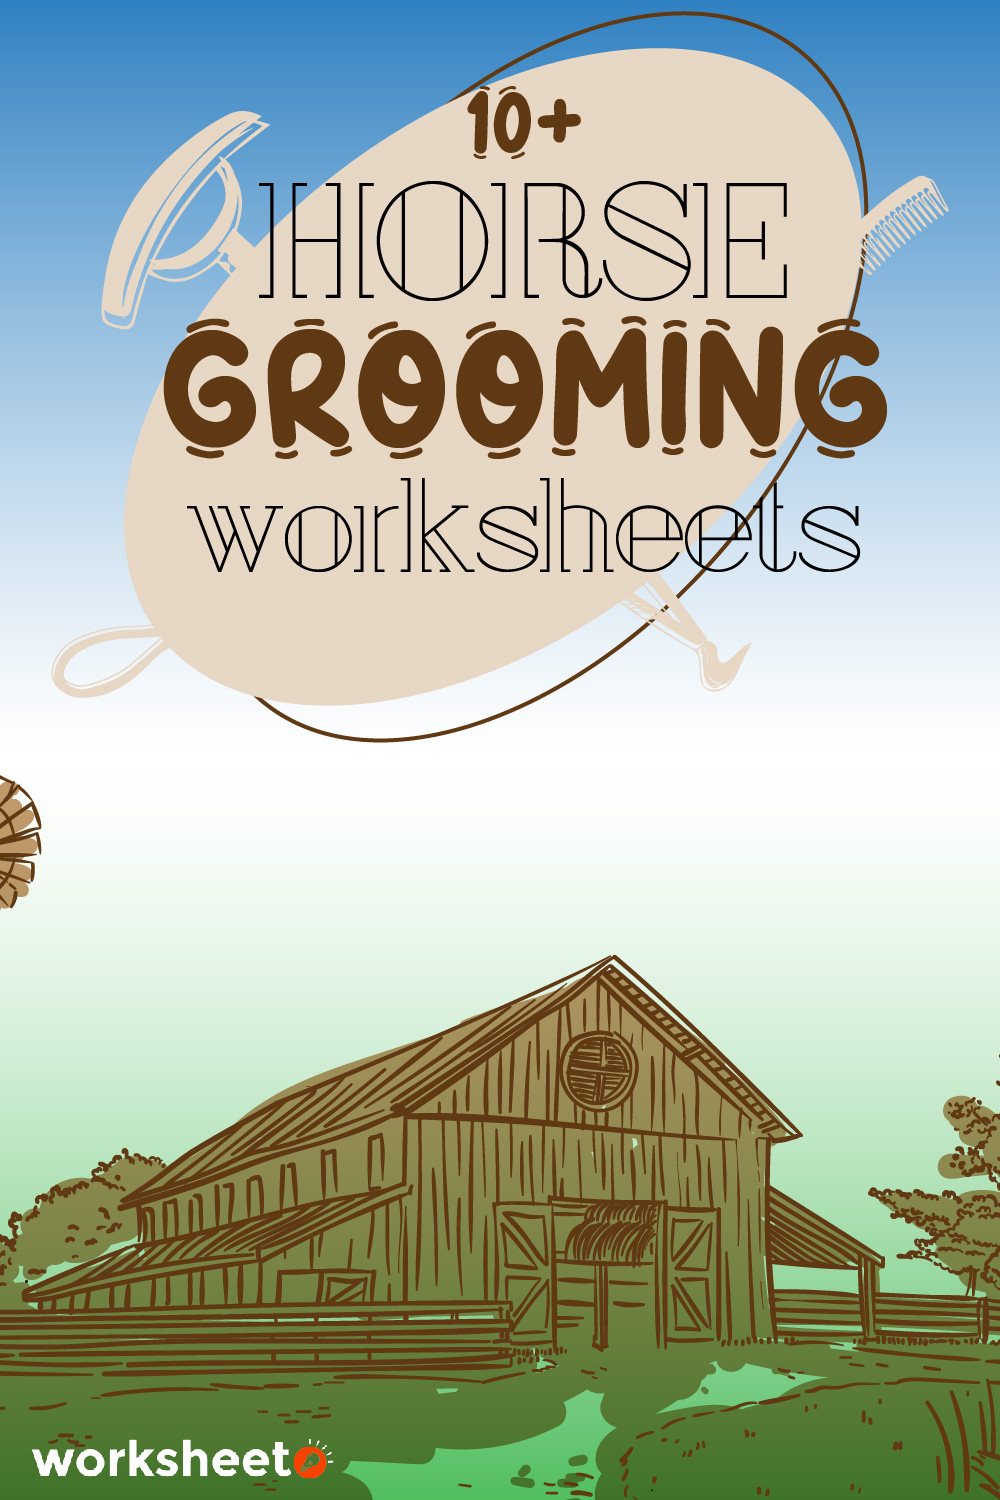 15 Images of Horse Grooming Worksheets